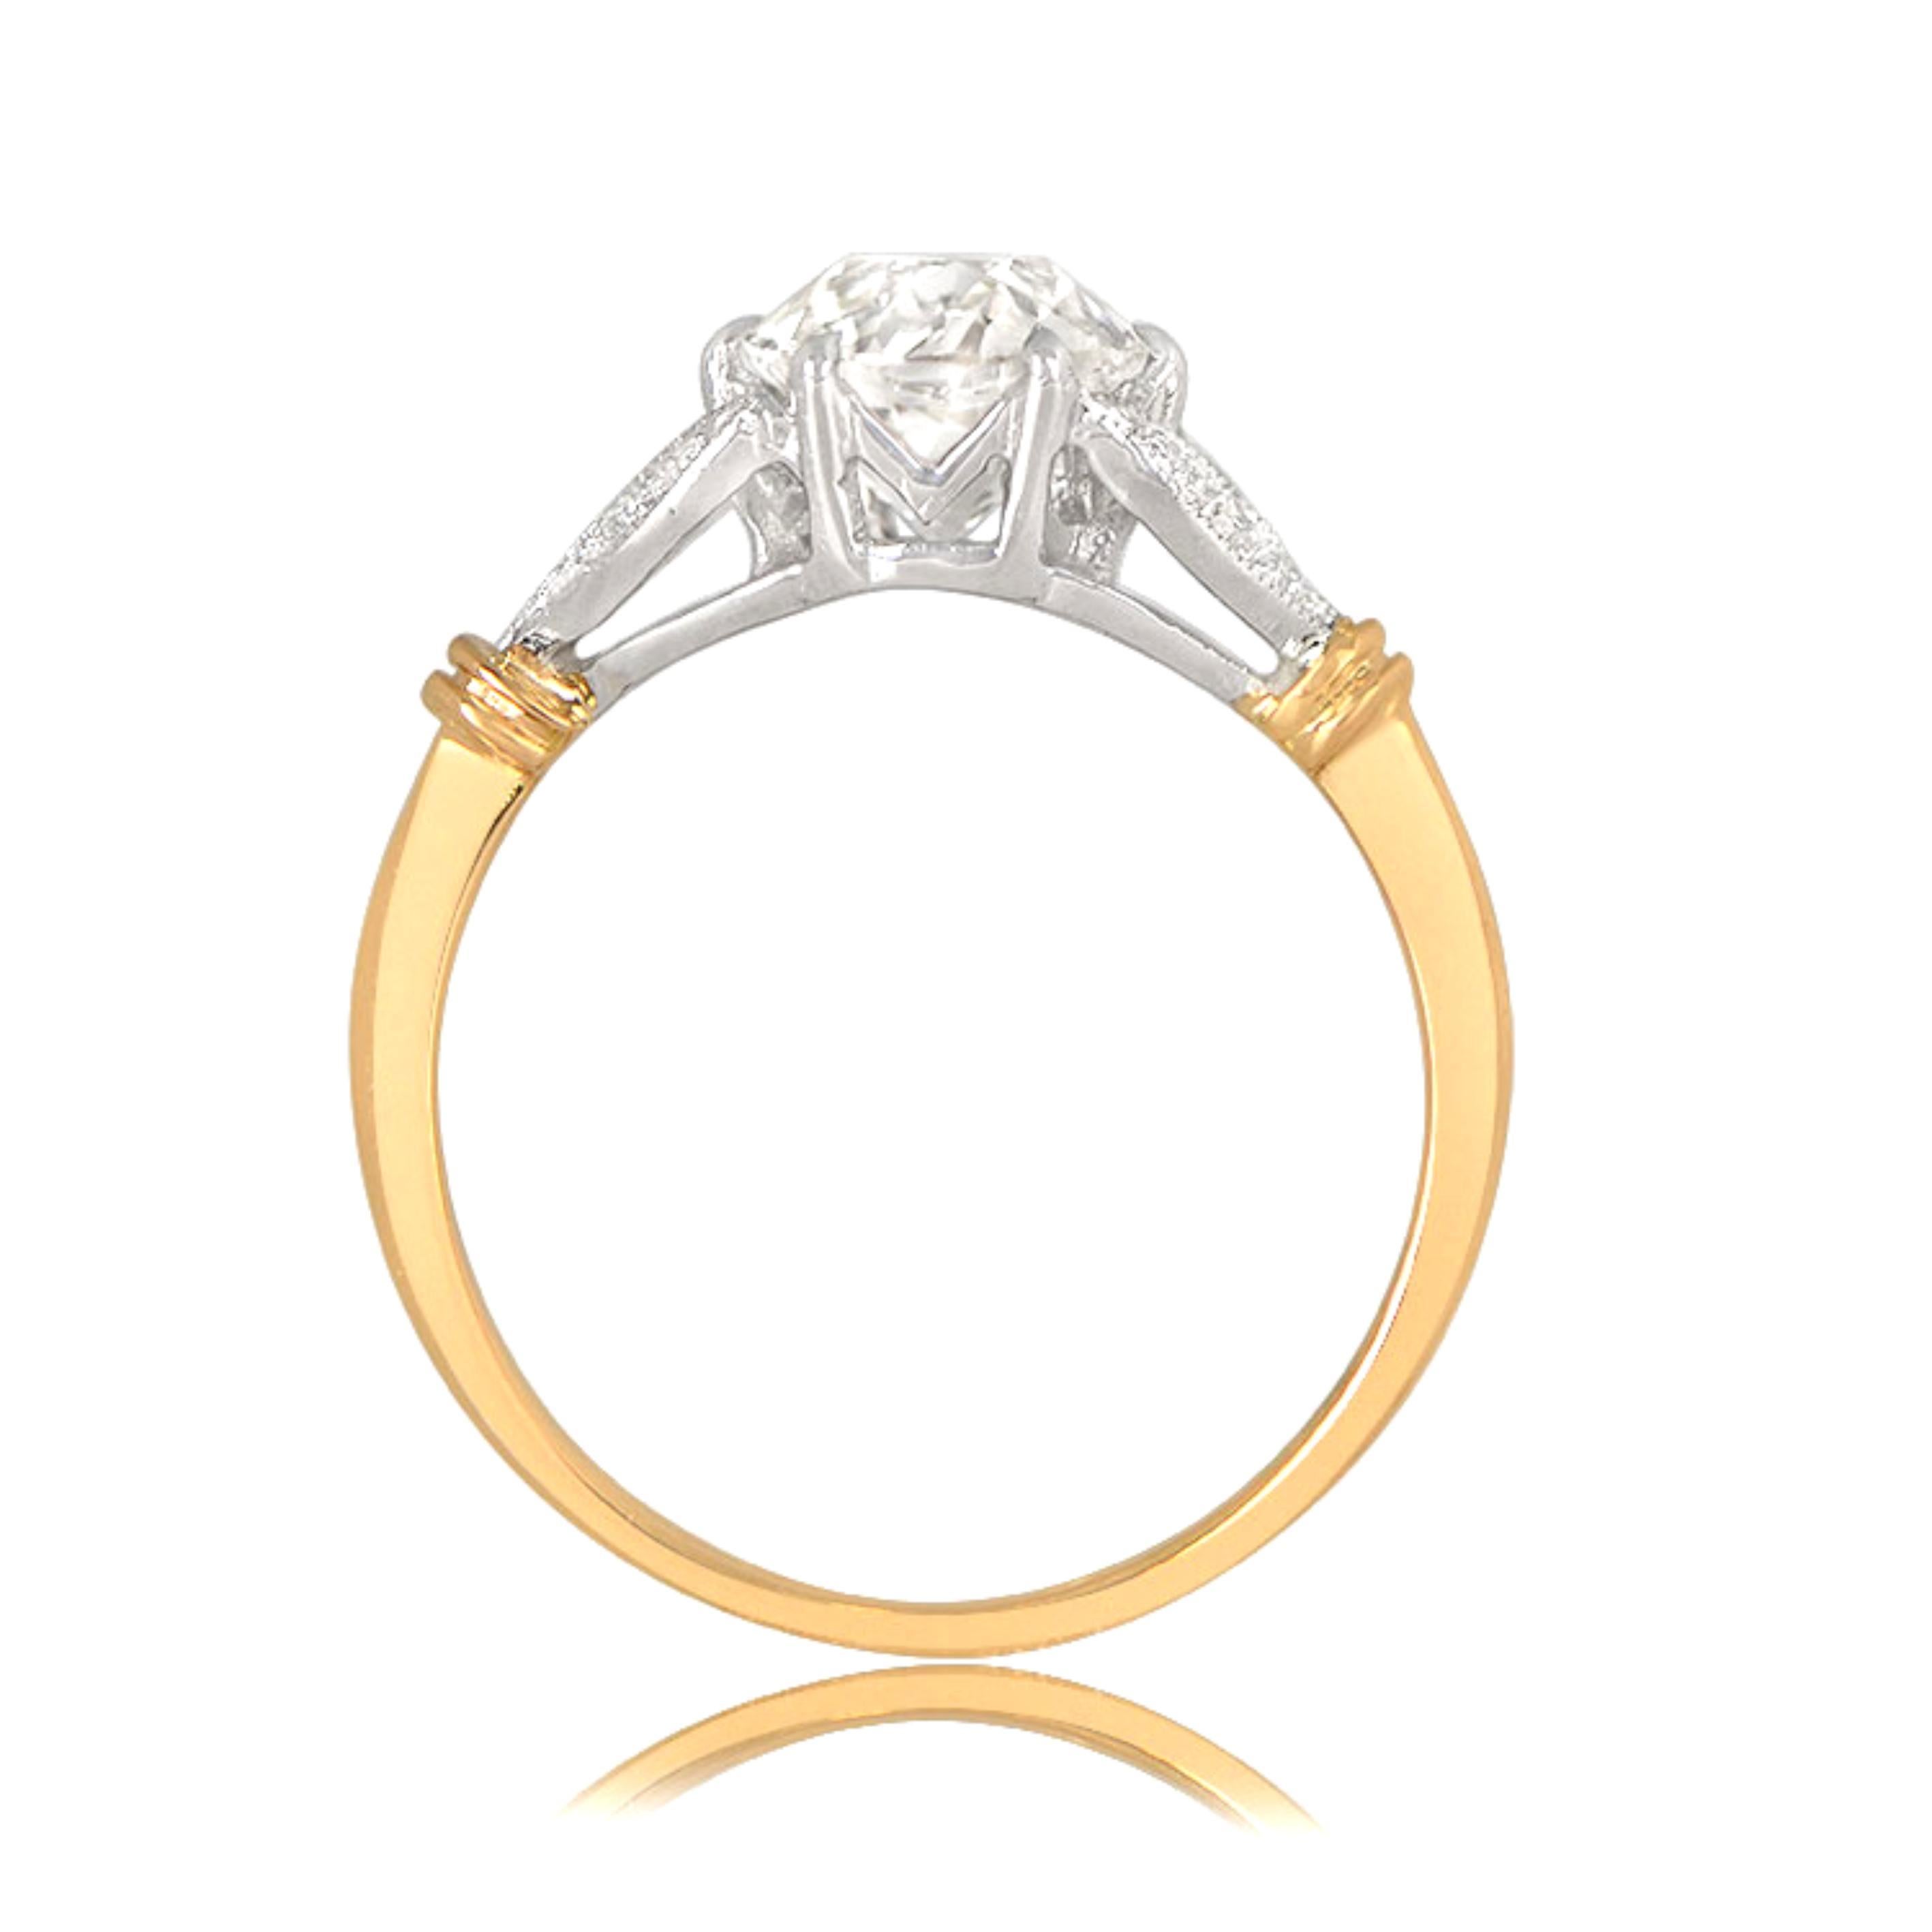 This Edwardian-inspired engagement ring features a delicate leaf motif and a vibrant 1.50-carat old European cut diamond at its center, with K color and VS2 clarity. The two shoulders of the ring are adorned with two leaves each, set with an